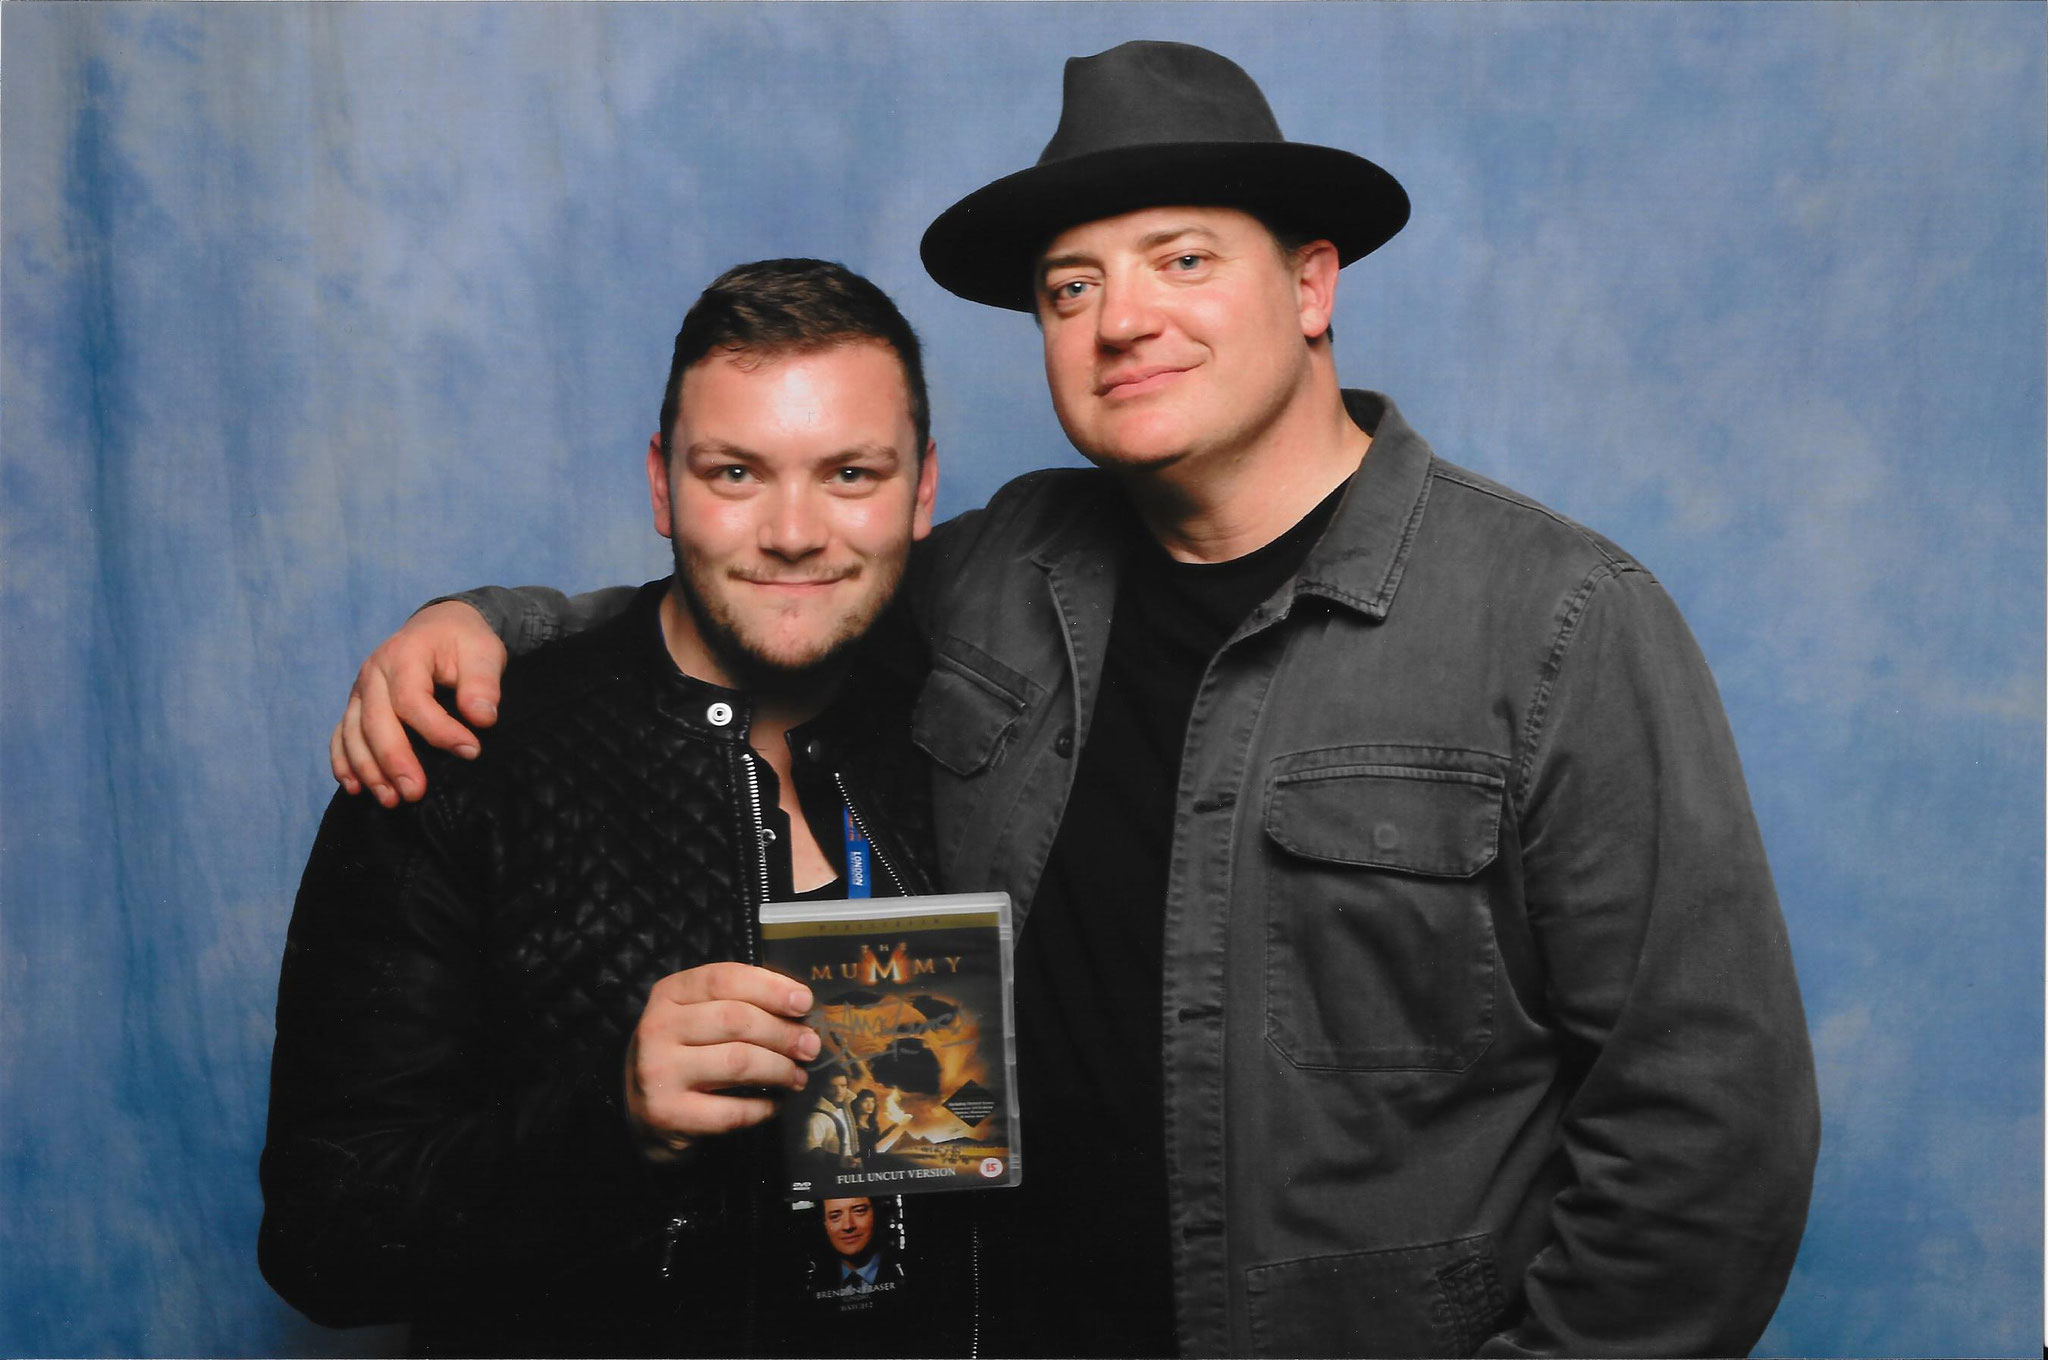 BRENDAN FRASER (RICK O'CONNELL IN "THE MUMMY" TRILOGY)